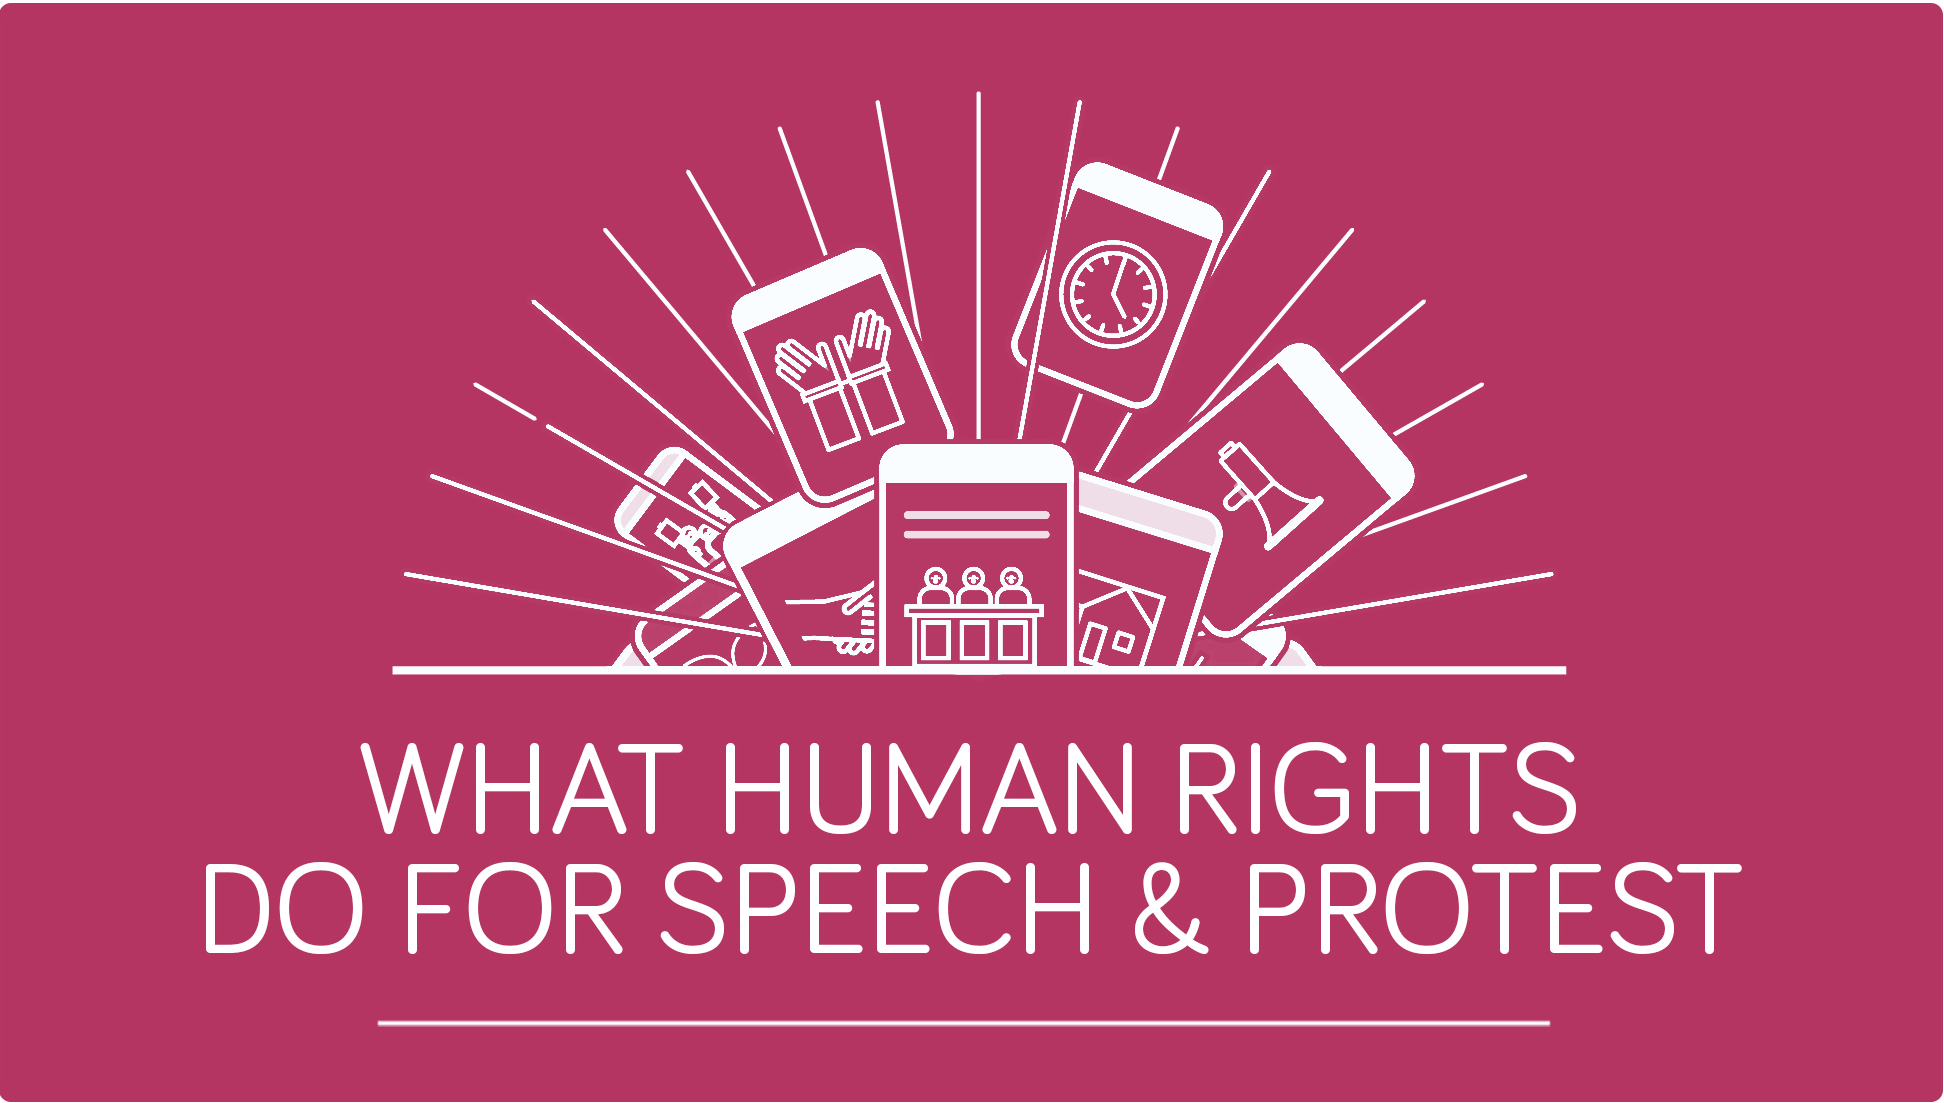 What Human Rights do for Speech & Protest - RightsInfo